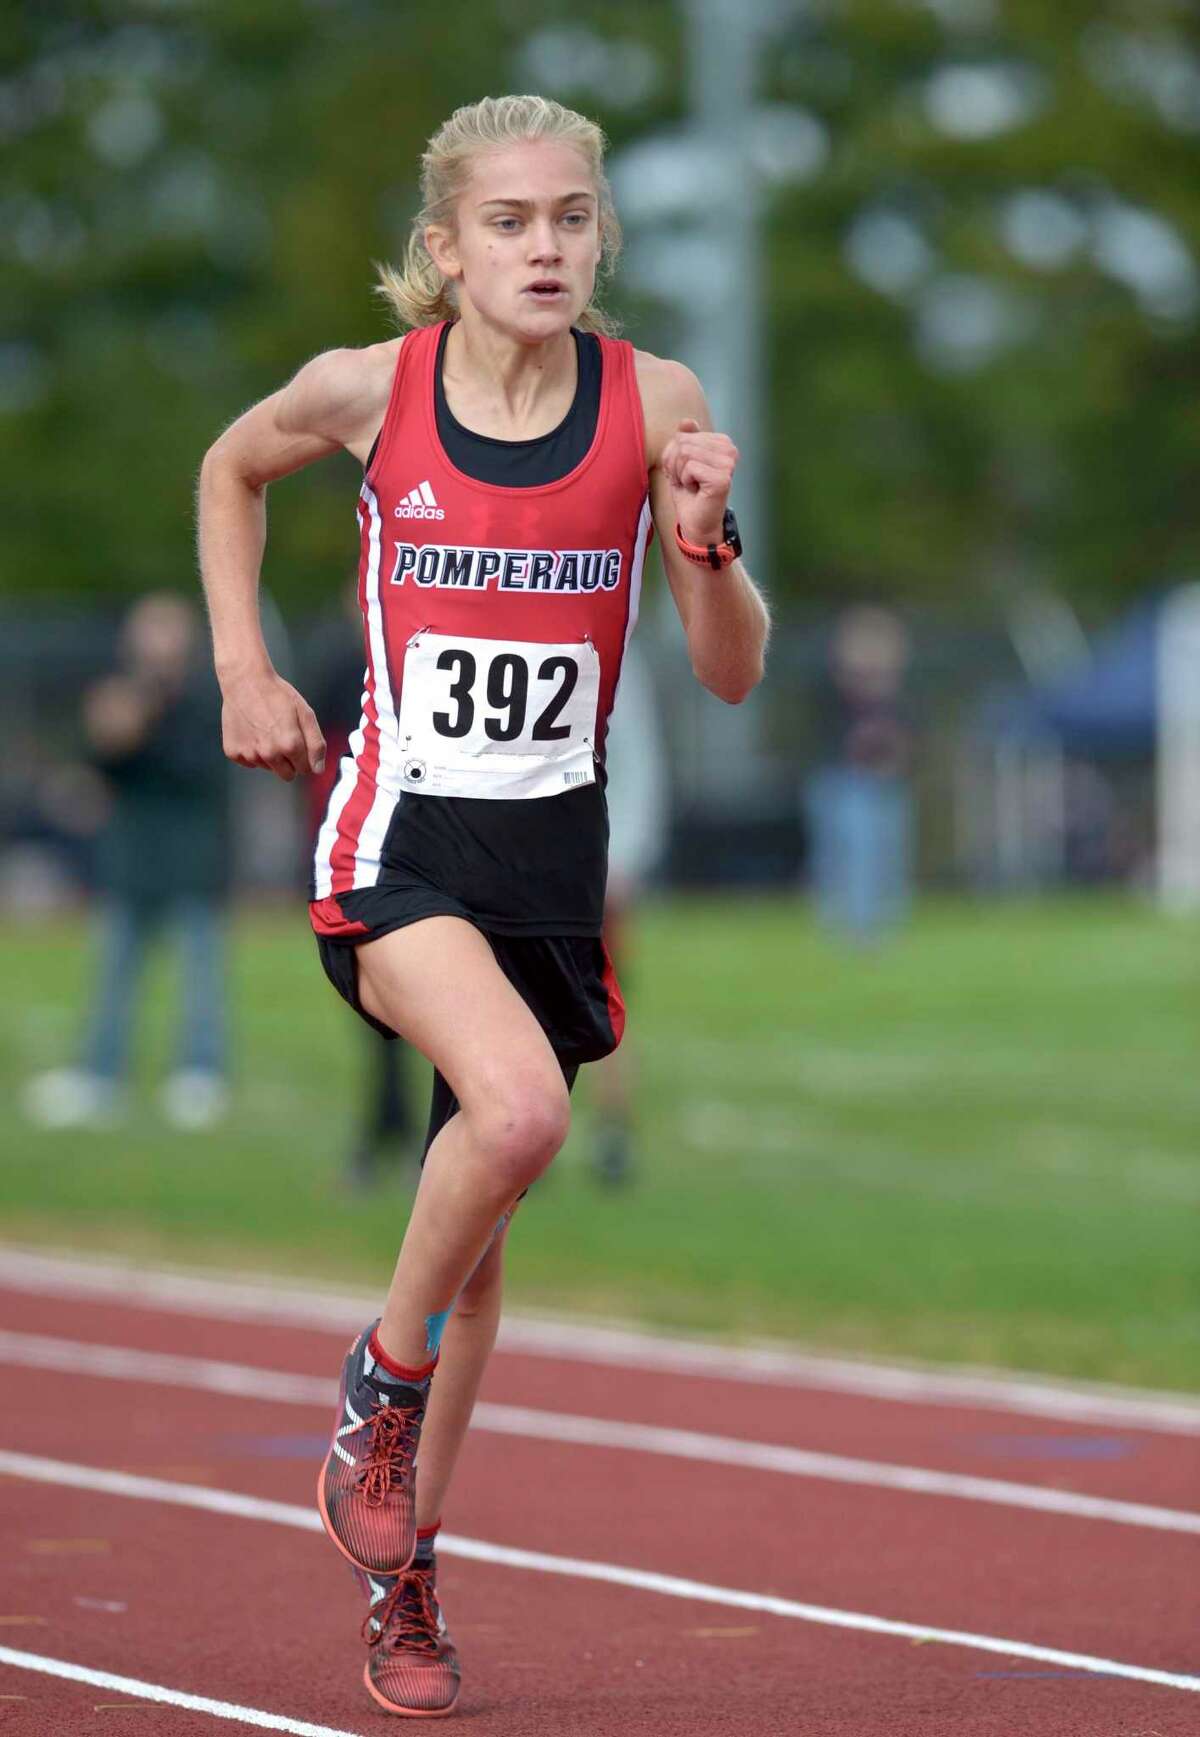 Pomperaug’s Kate Wiser was named the 2020-21 Gatorade Connecticut Girls Cross Country Player of the Year, Gatorade announced on Thursday morning.